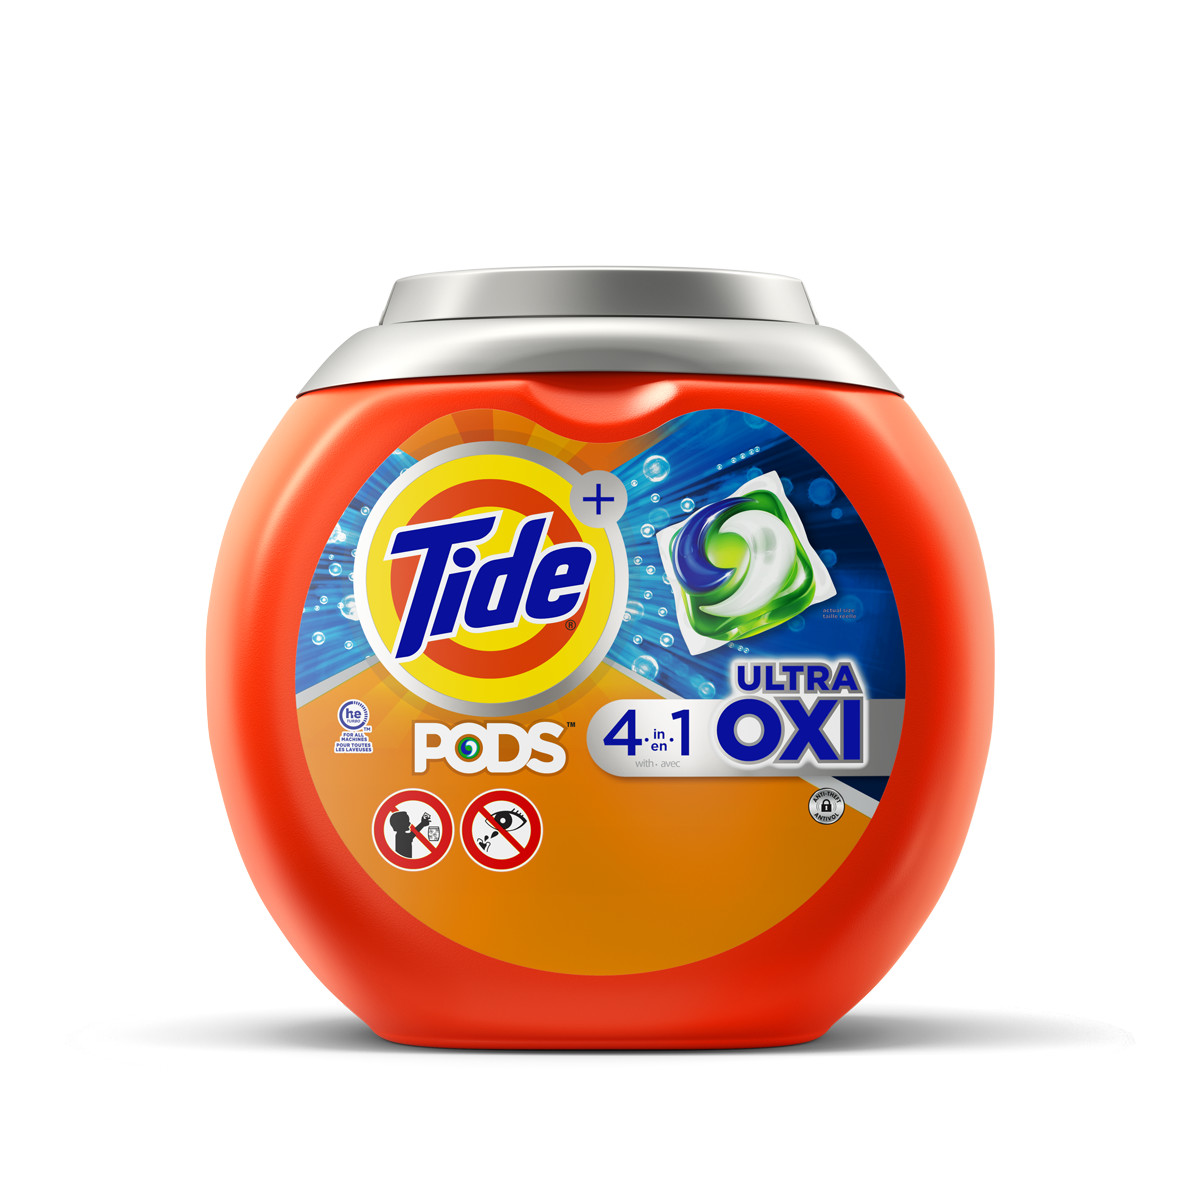 Tide PODS® Ultra OXI Laundry Detergent